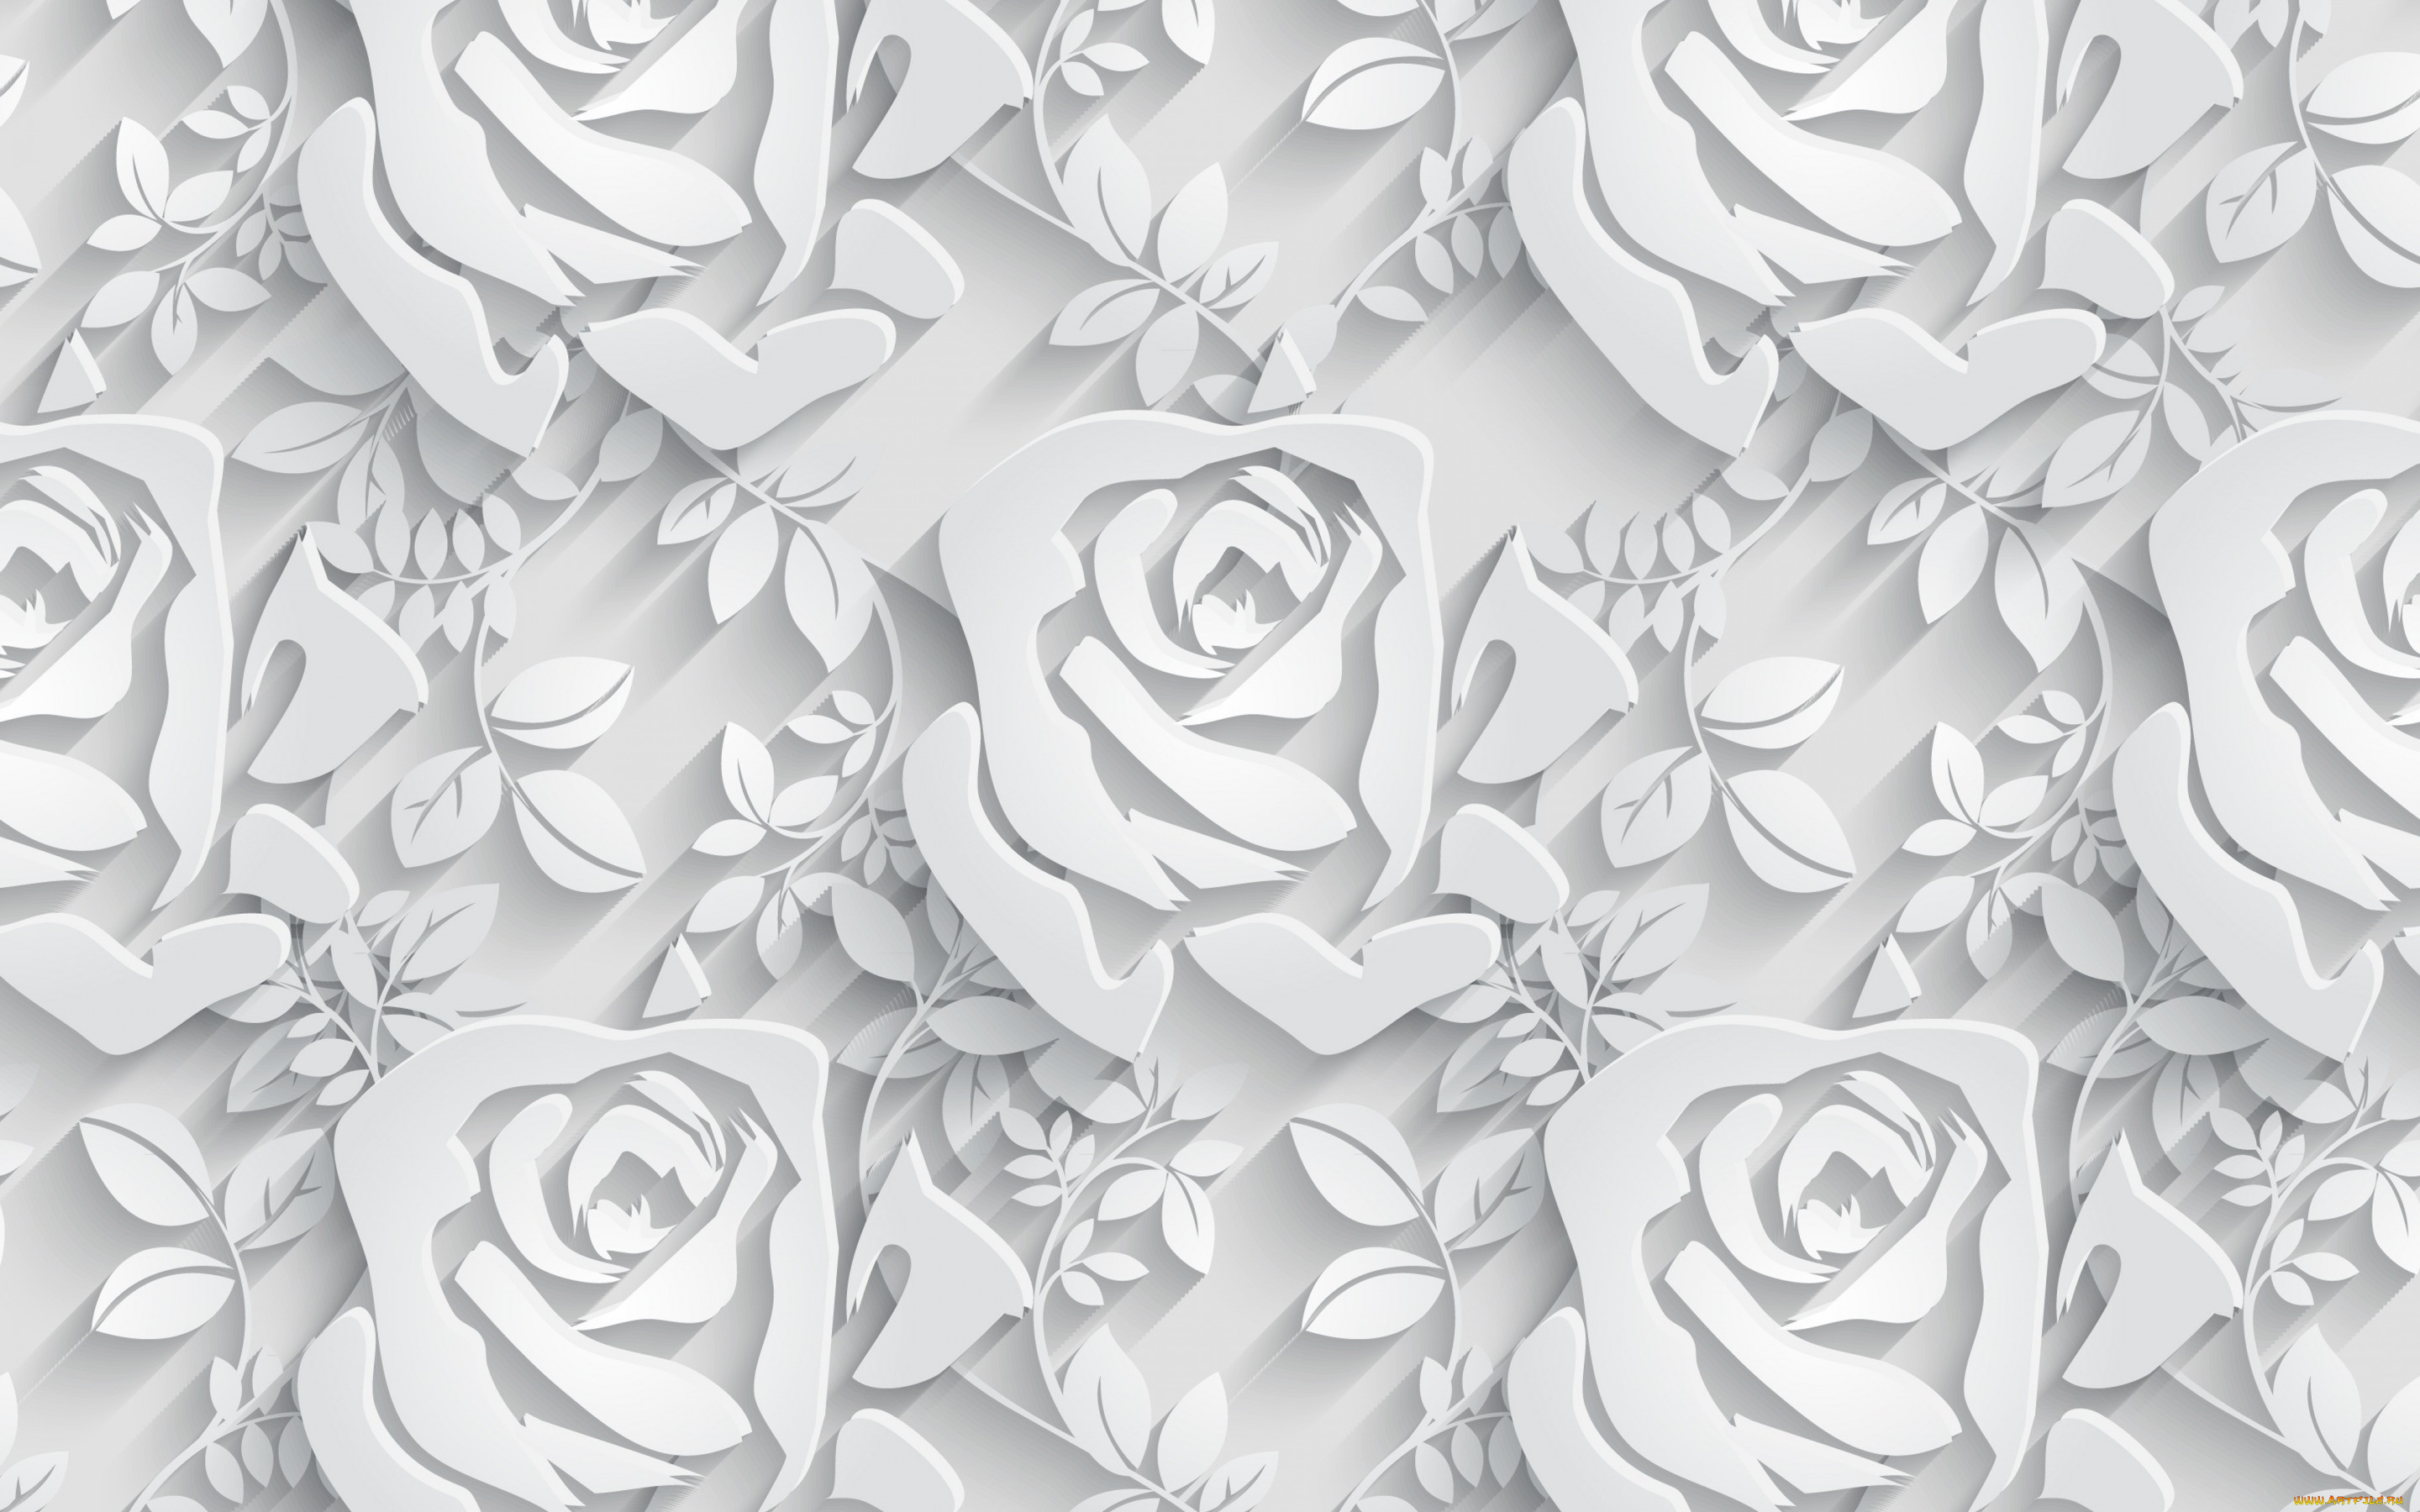  ,  , flowers, , , , seamless, floral, , pattern